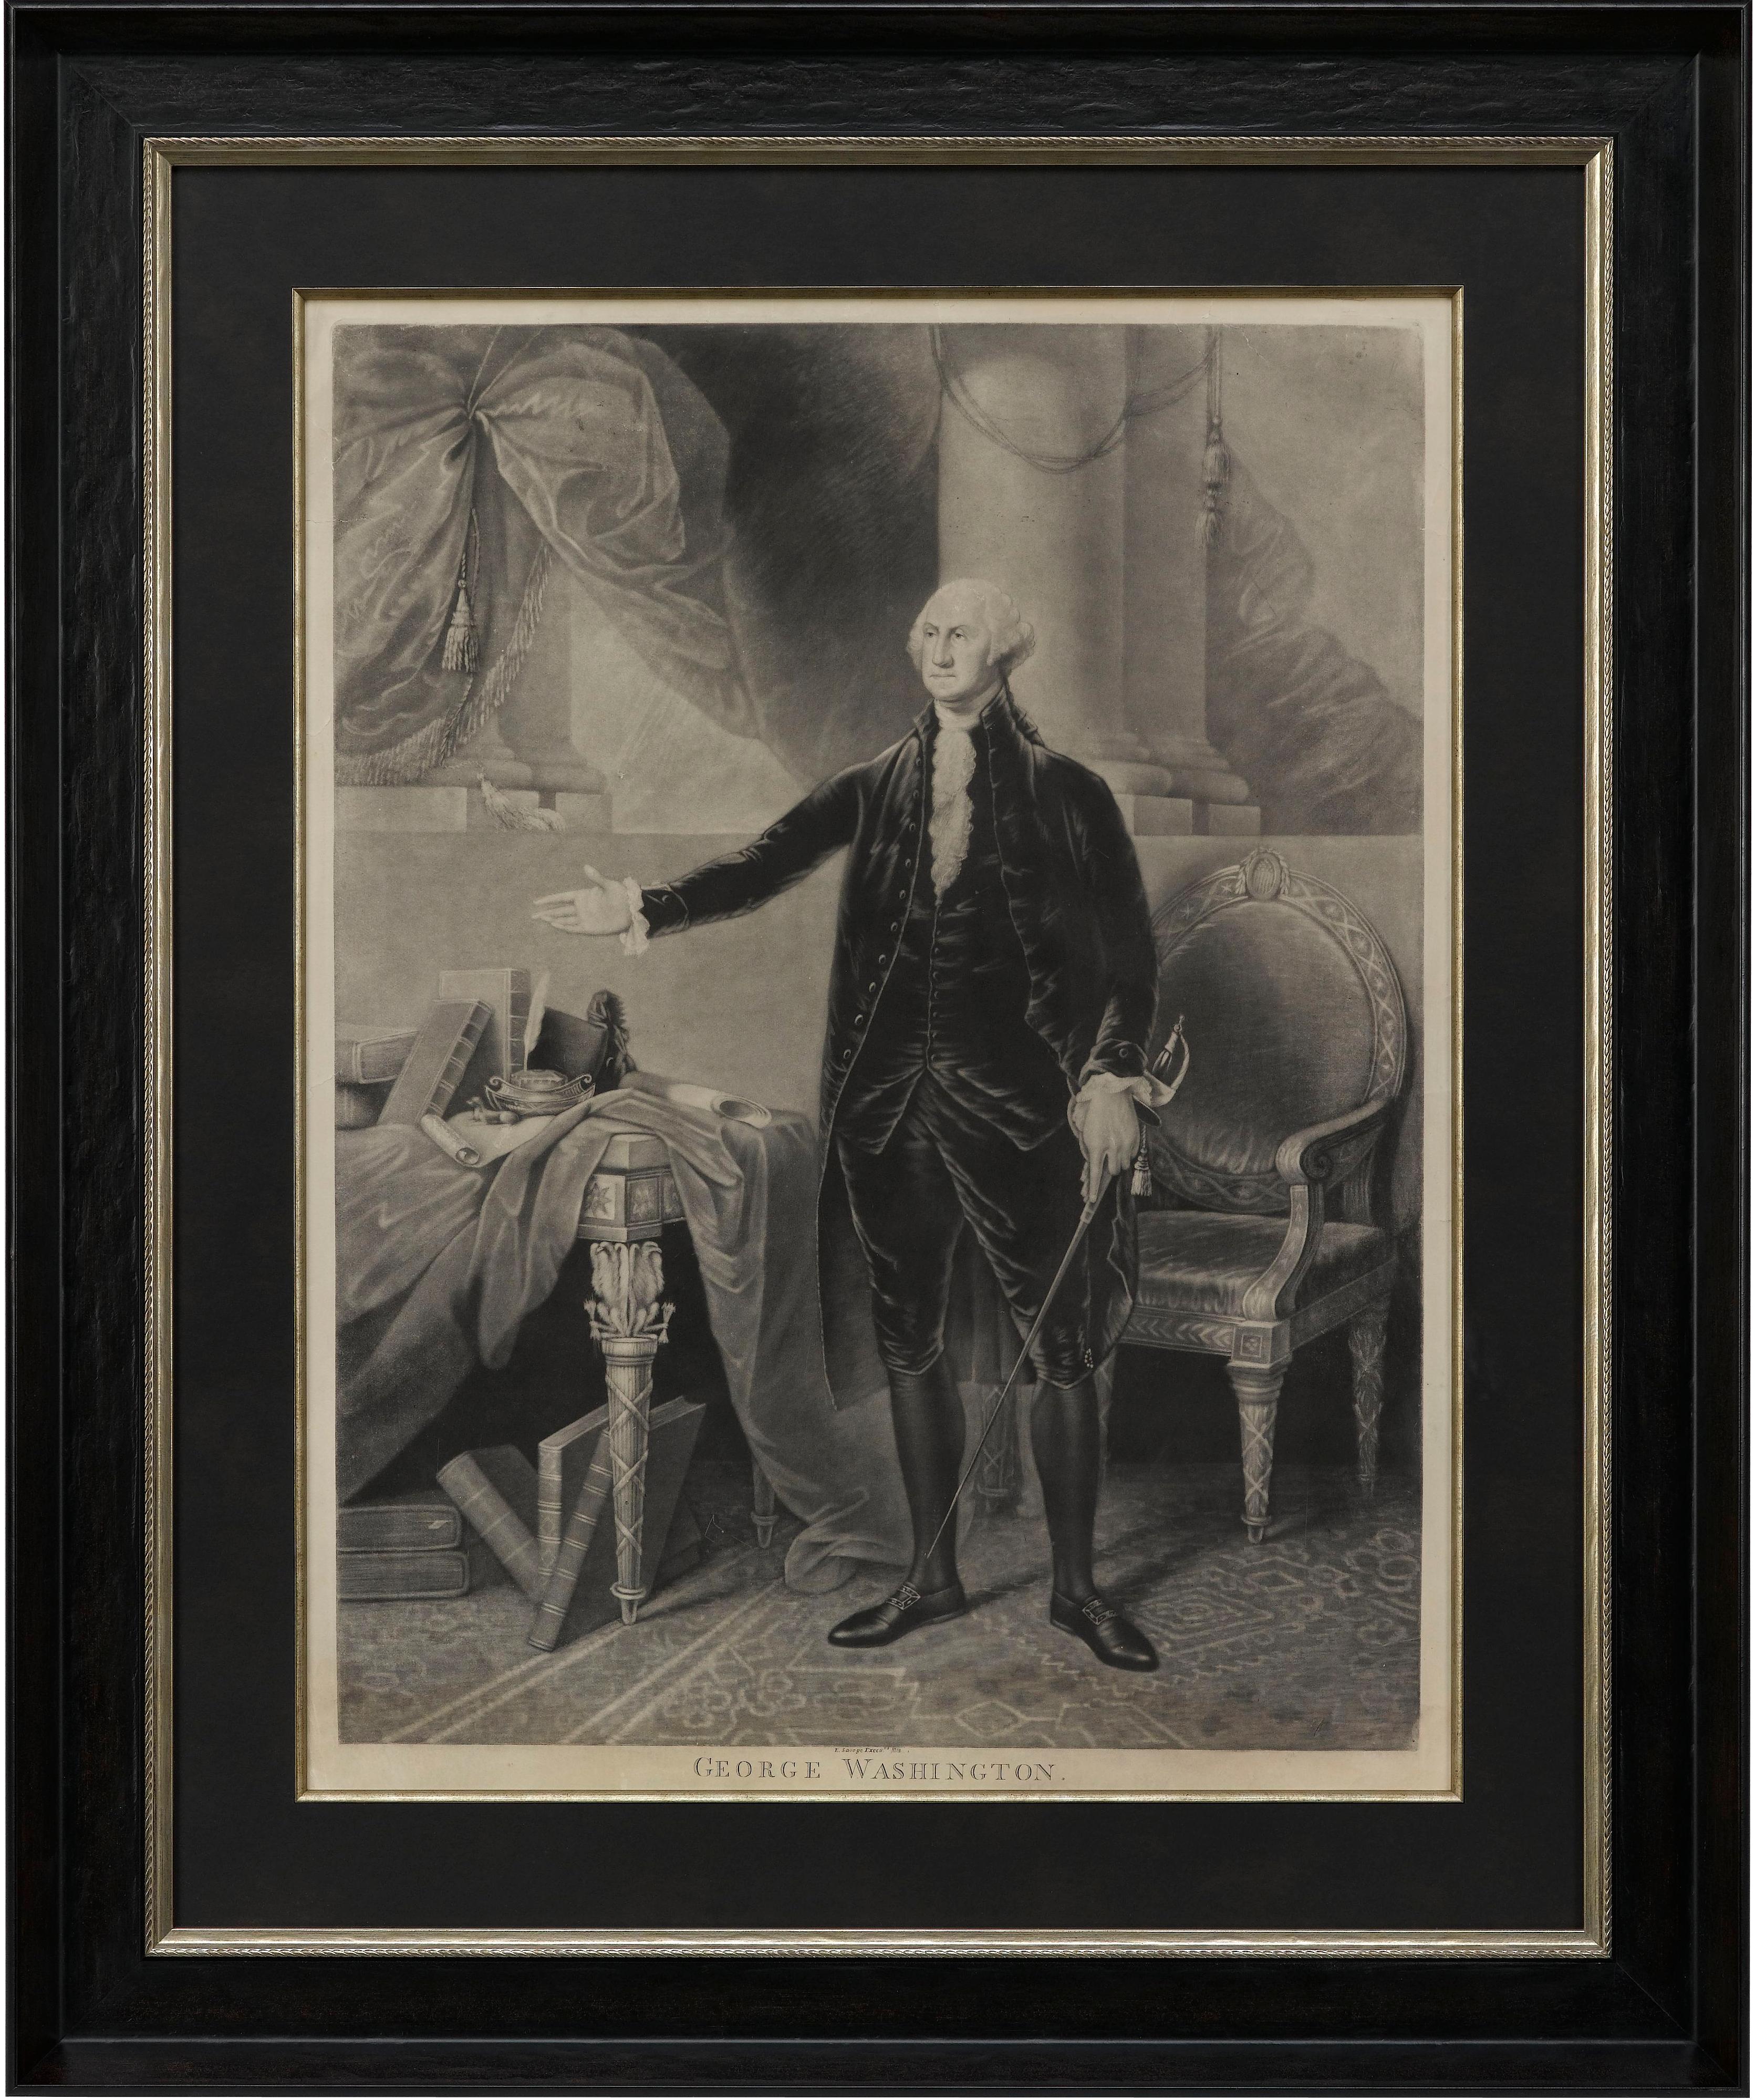 Offered is an original mezzotint print depicting a portrait of George Washington. The work dates to 1801 and was produced by engraver Edward Savage.

This print was published shortly after Washington's death, to celebrate his importance as one of